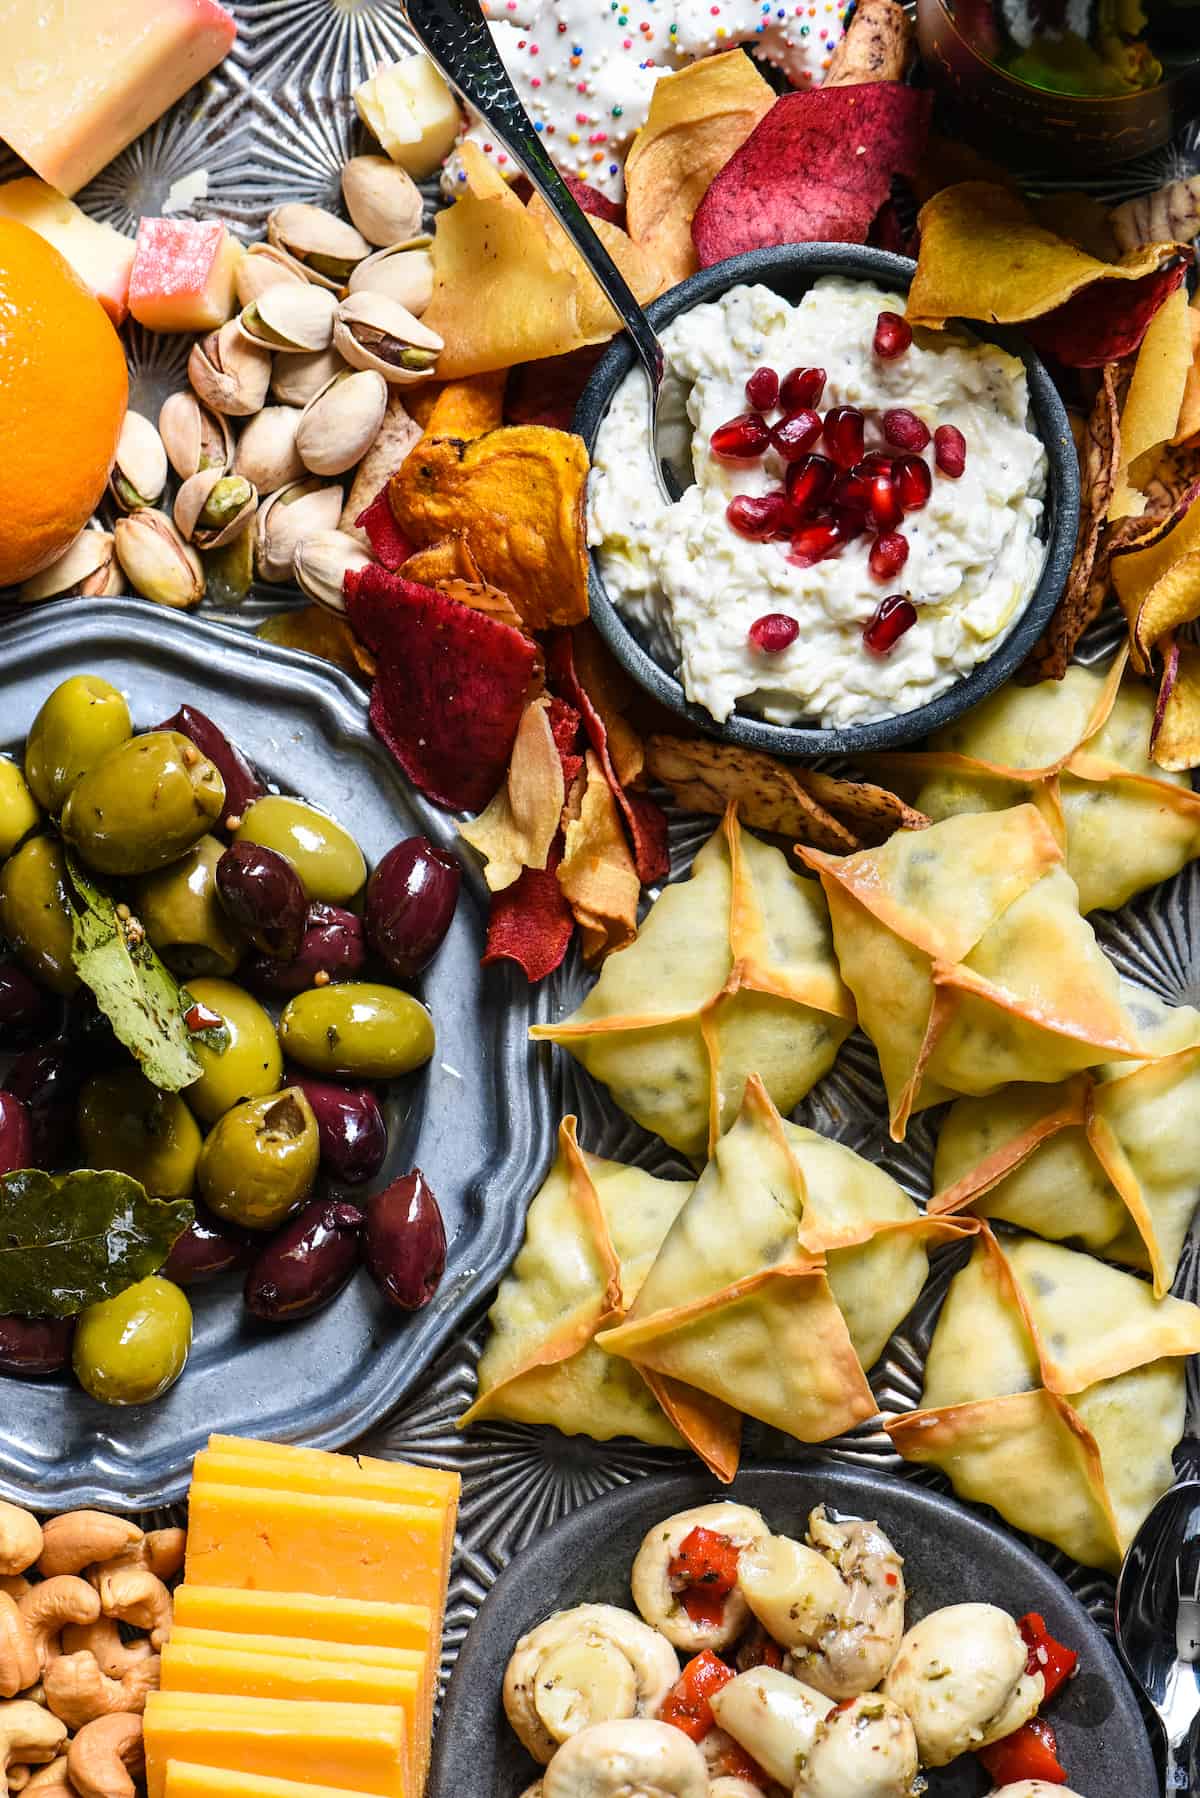 Closeup photo of platter of New Year's Eve snacks, focusing on wontons, olives and creamy dip.